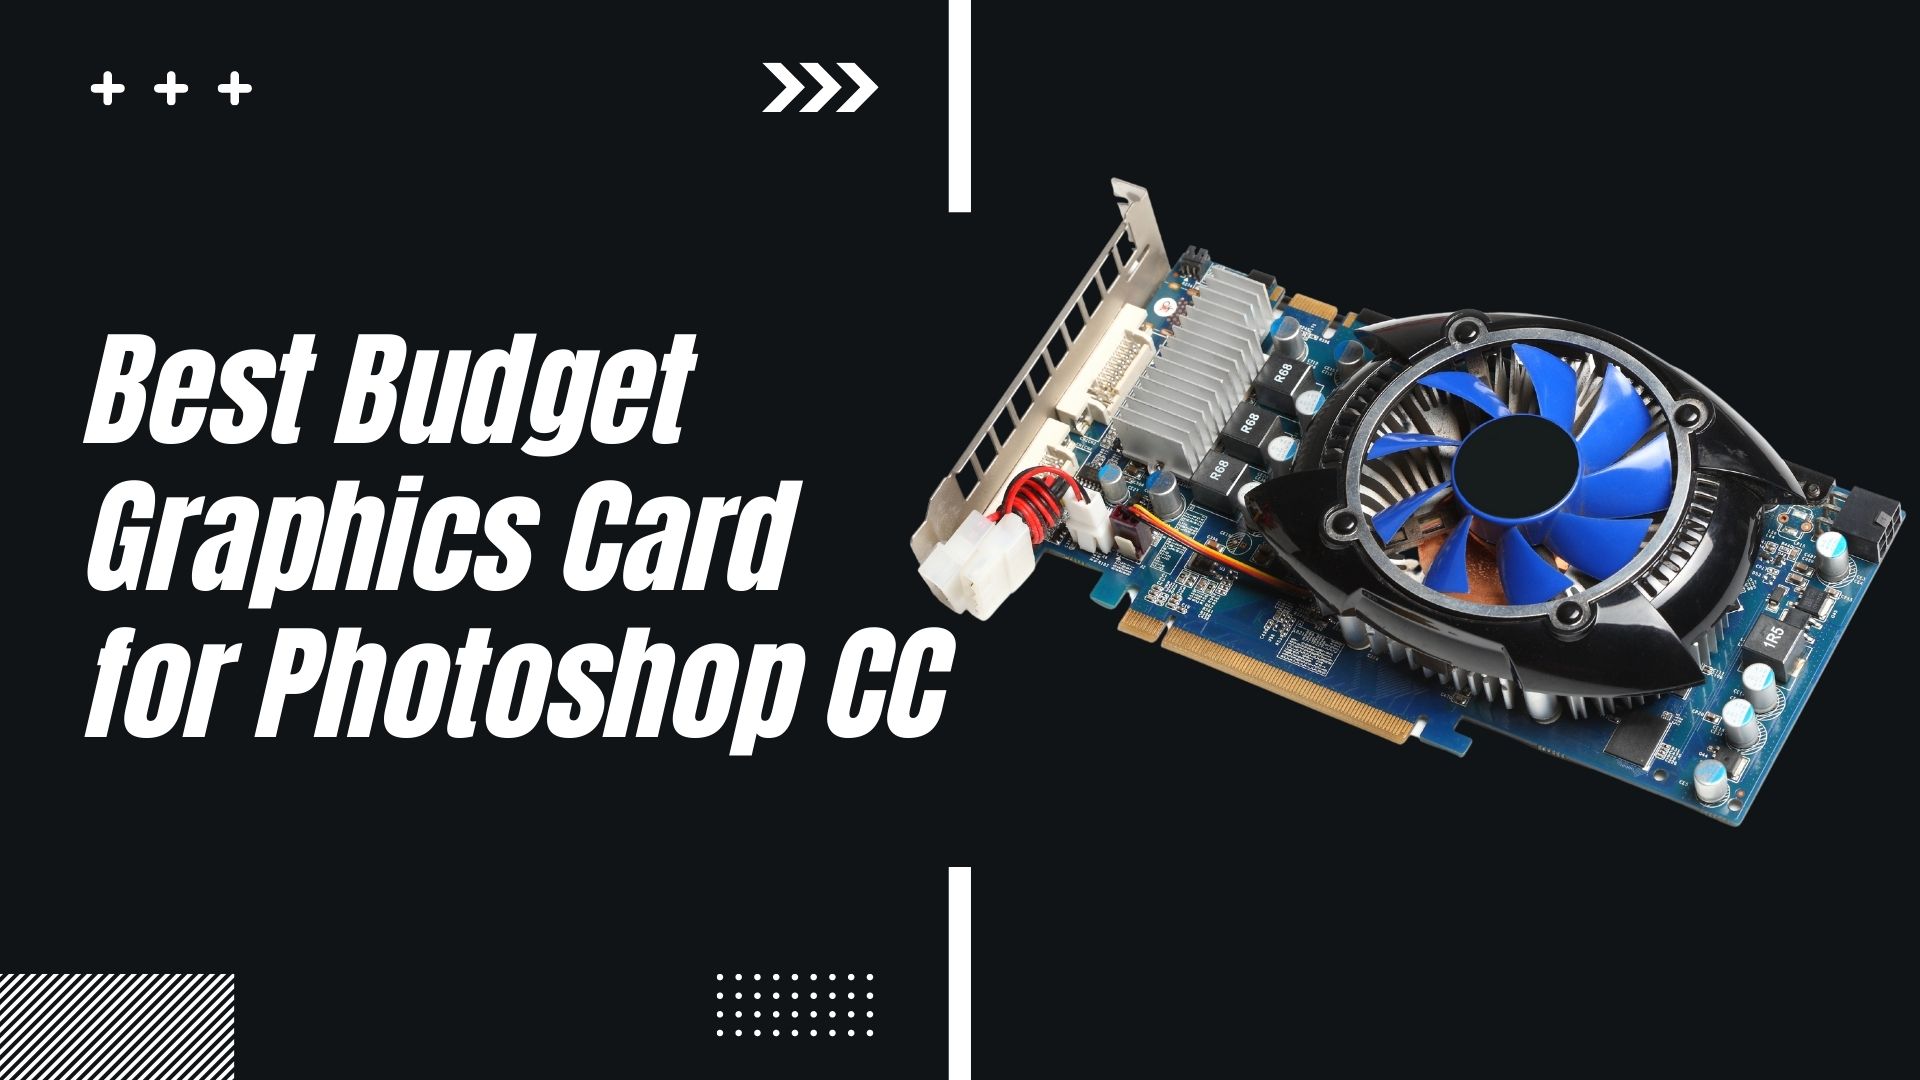 Best Budget Graphics Card for Photoshop CC